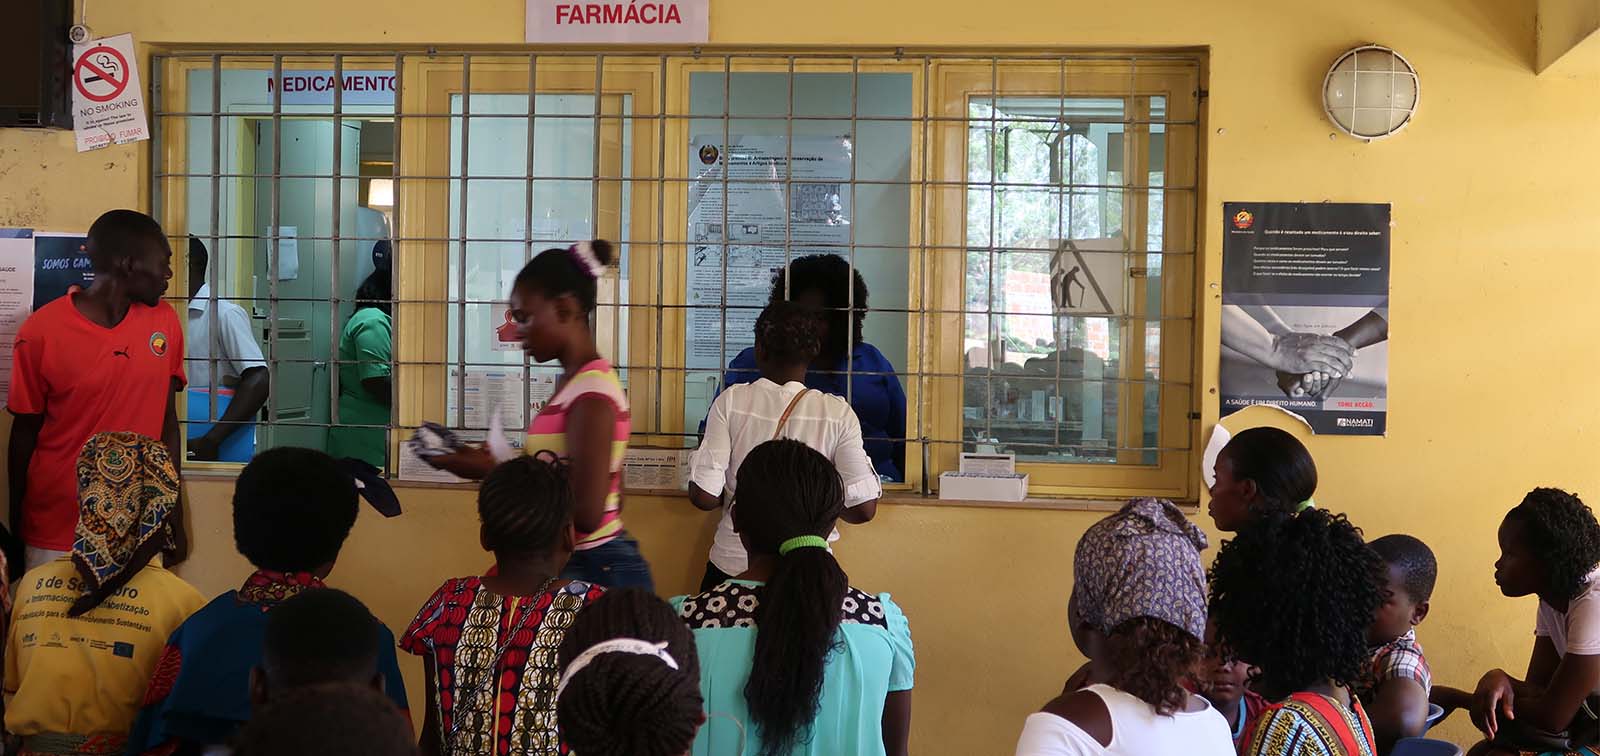 Some patients attend in front of the pharmacy at the Manhiça Hospital, Mozambique